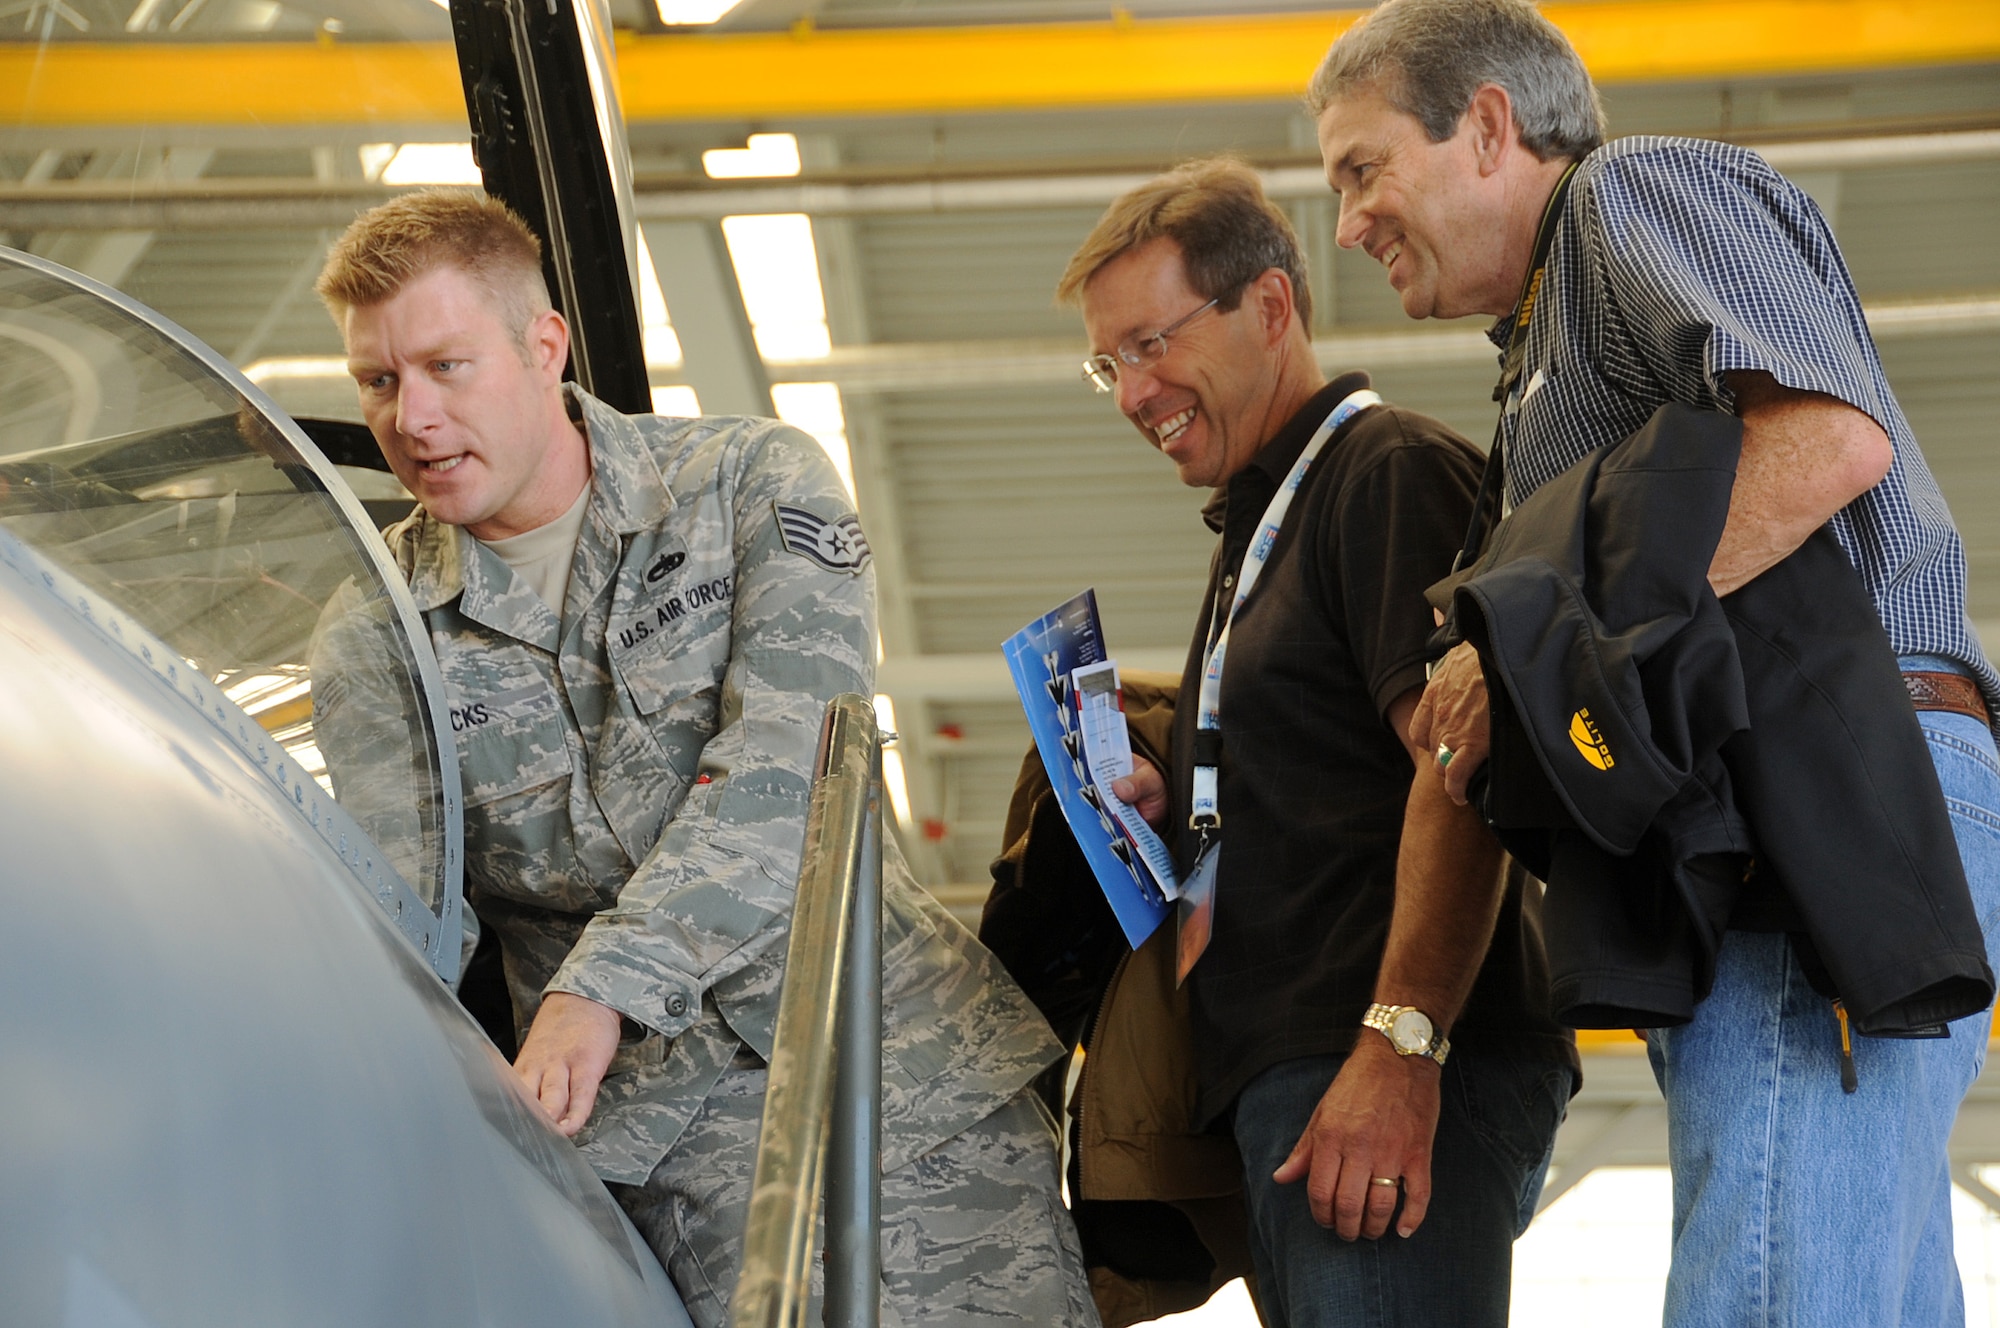 Oregon Air National Guard Staff Sgt. Nicholas Hicks answers questions from (from left to right) Todd Hess and Jim Linkous, both from Portland, Ore., about the F-15 Eagle on display during ESGR day at the Portland Air National Guard Base, Portland, Ore., Aug. 3, 2012. (U.S. Air Force photo provided by Staff Sgt. Lincoln Lease, 142nd Fighter Wing Public Affairs)